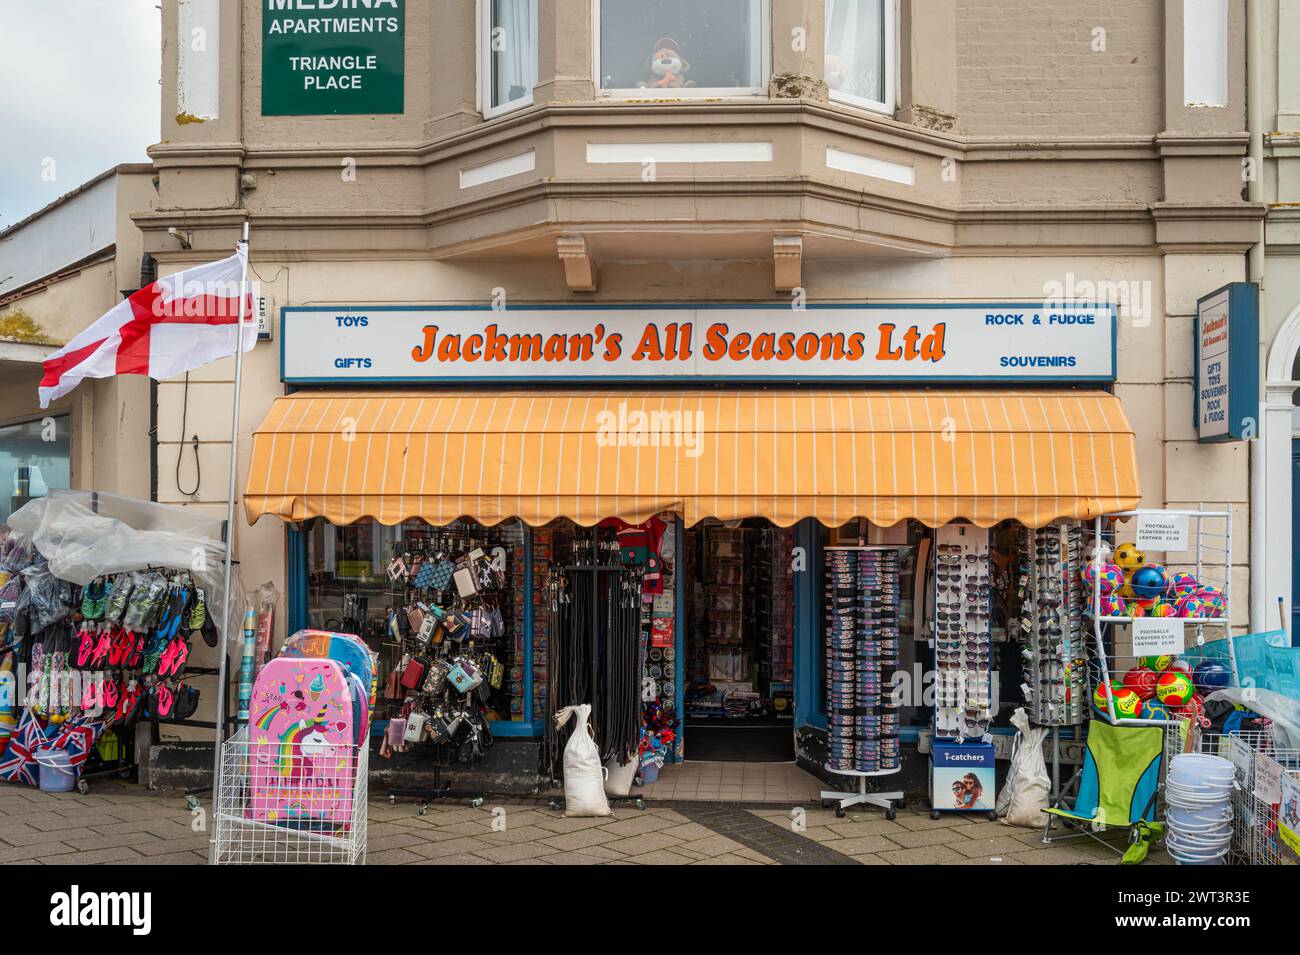 Jackman's All seasons Ltd  front entrance of the gift shop in Teignmouth, Devon, England, UK. Articles for sale in racks and stacked on the pavement. Stock Photo